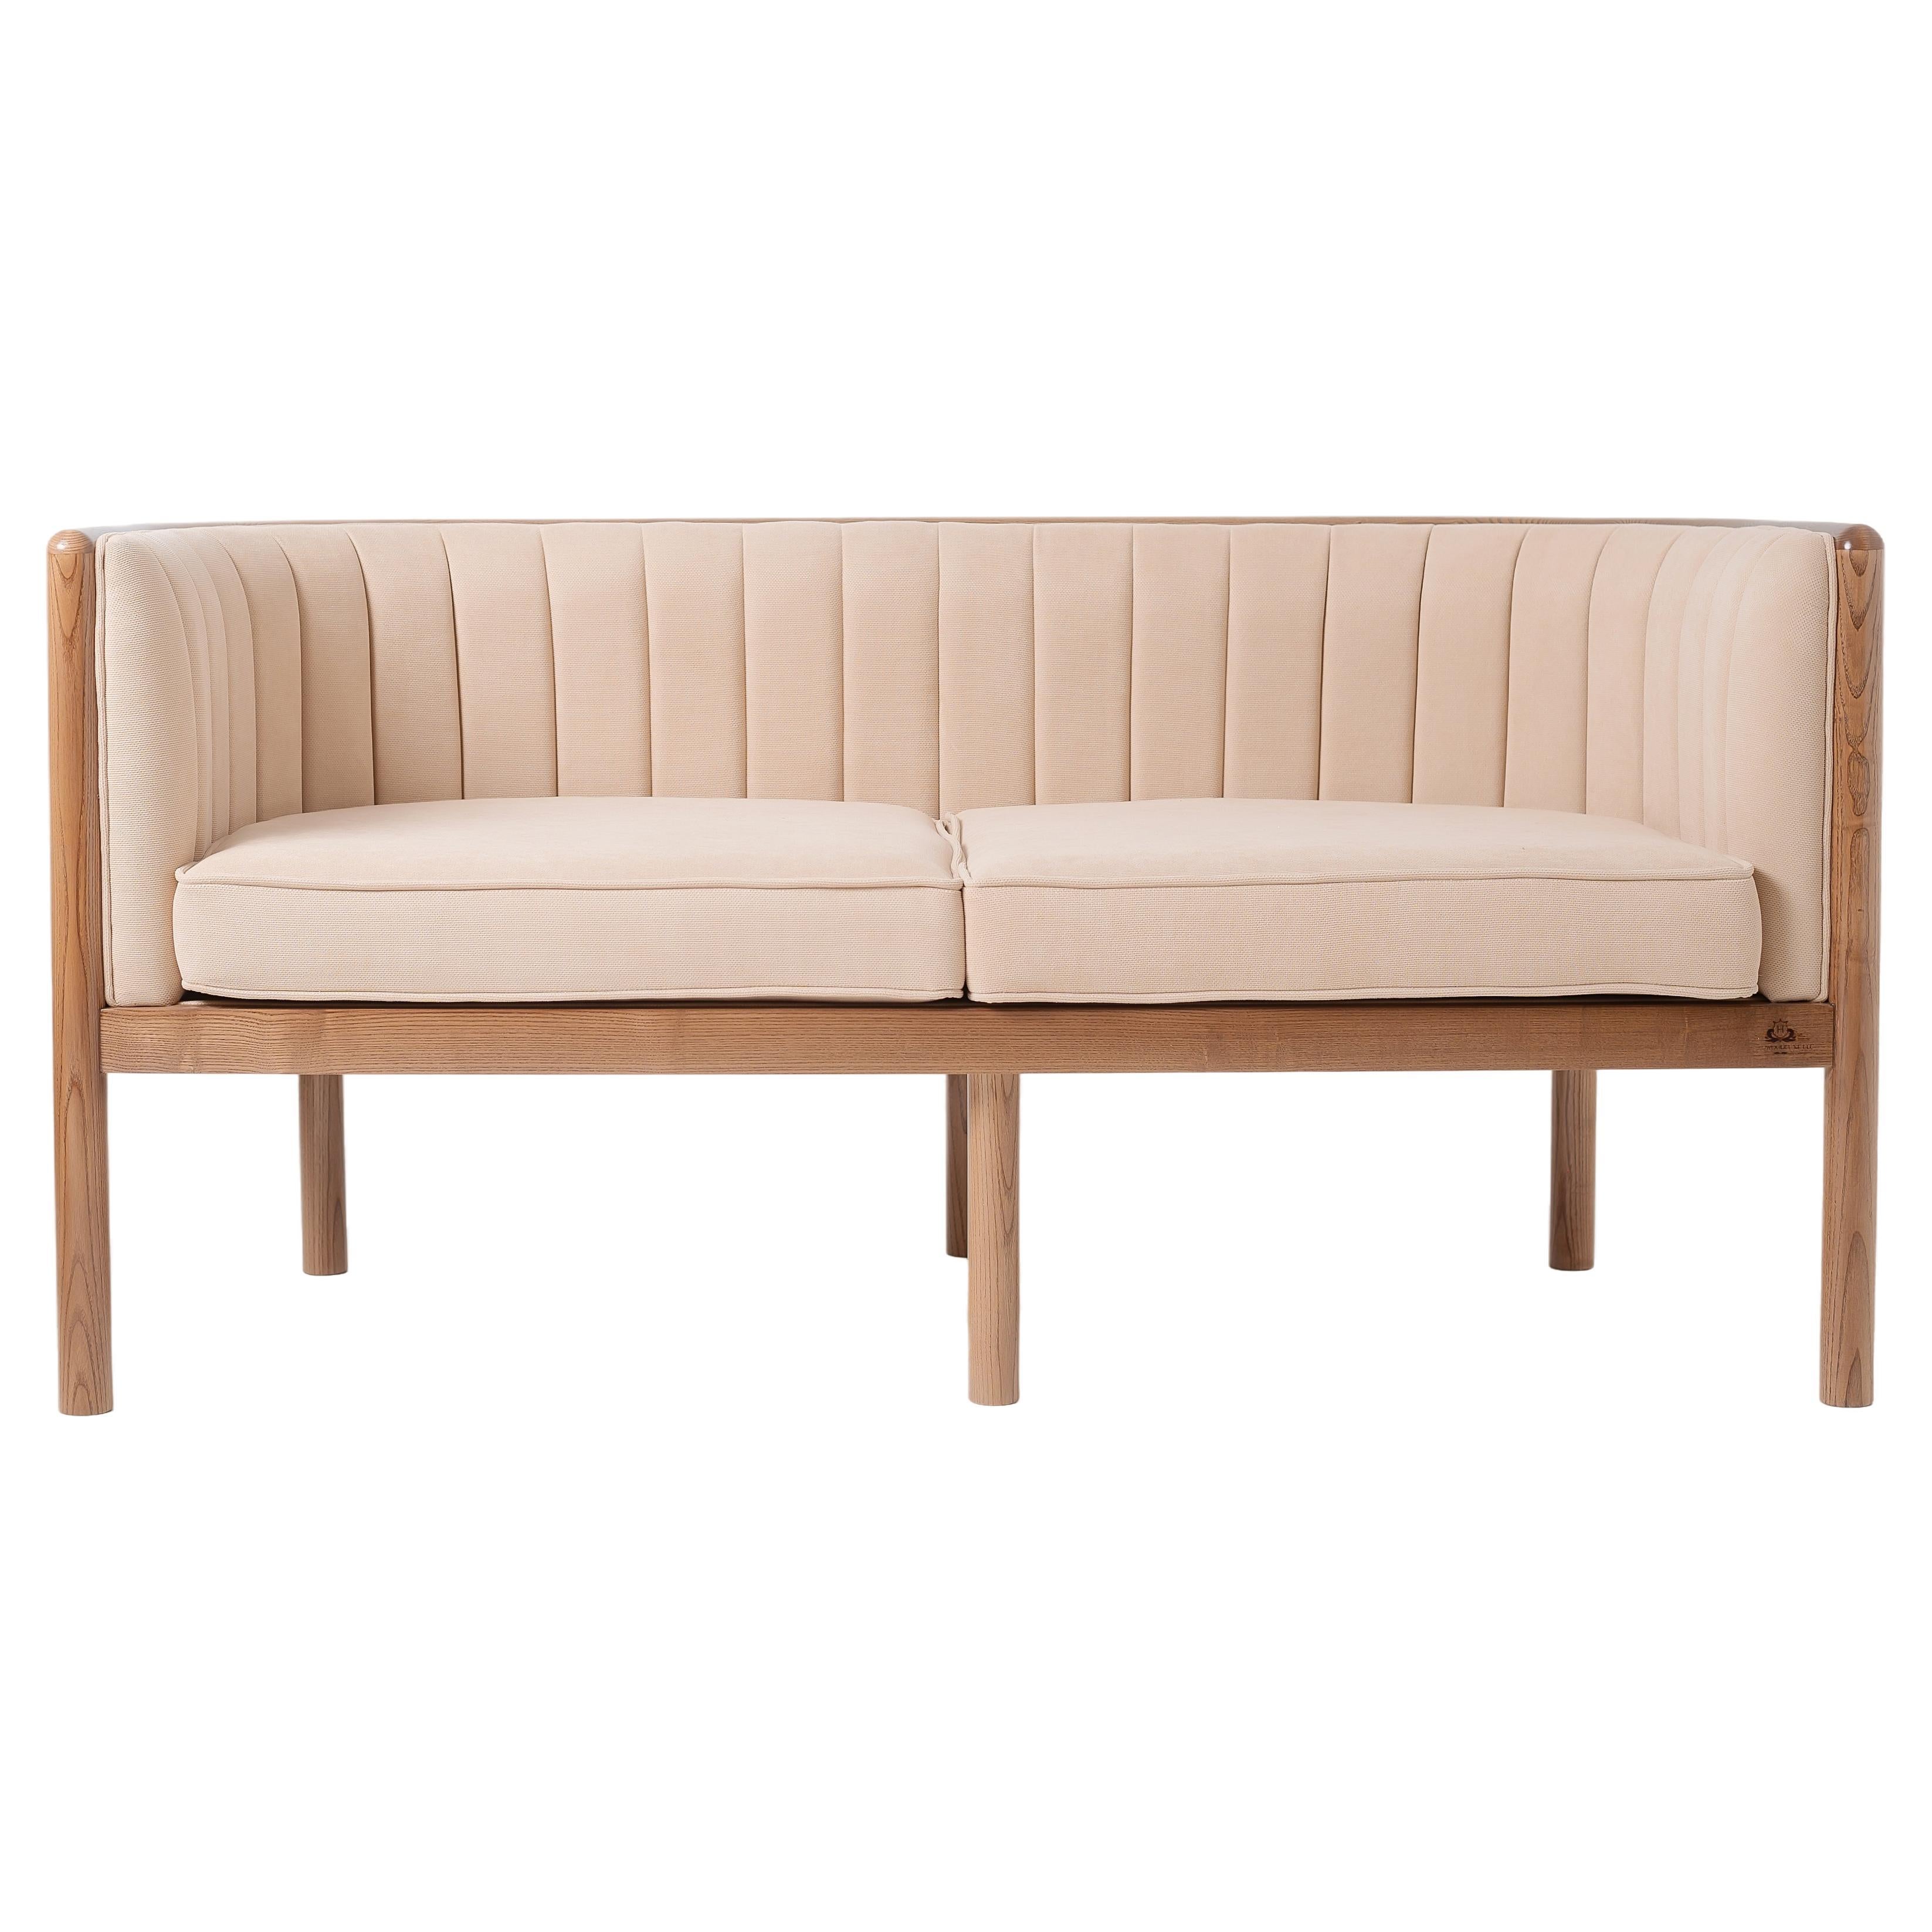 Modern Living Room Loveseat in Ash Solid Wood and Beige Material